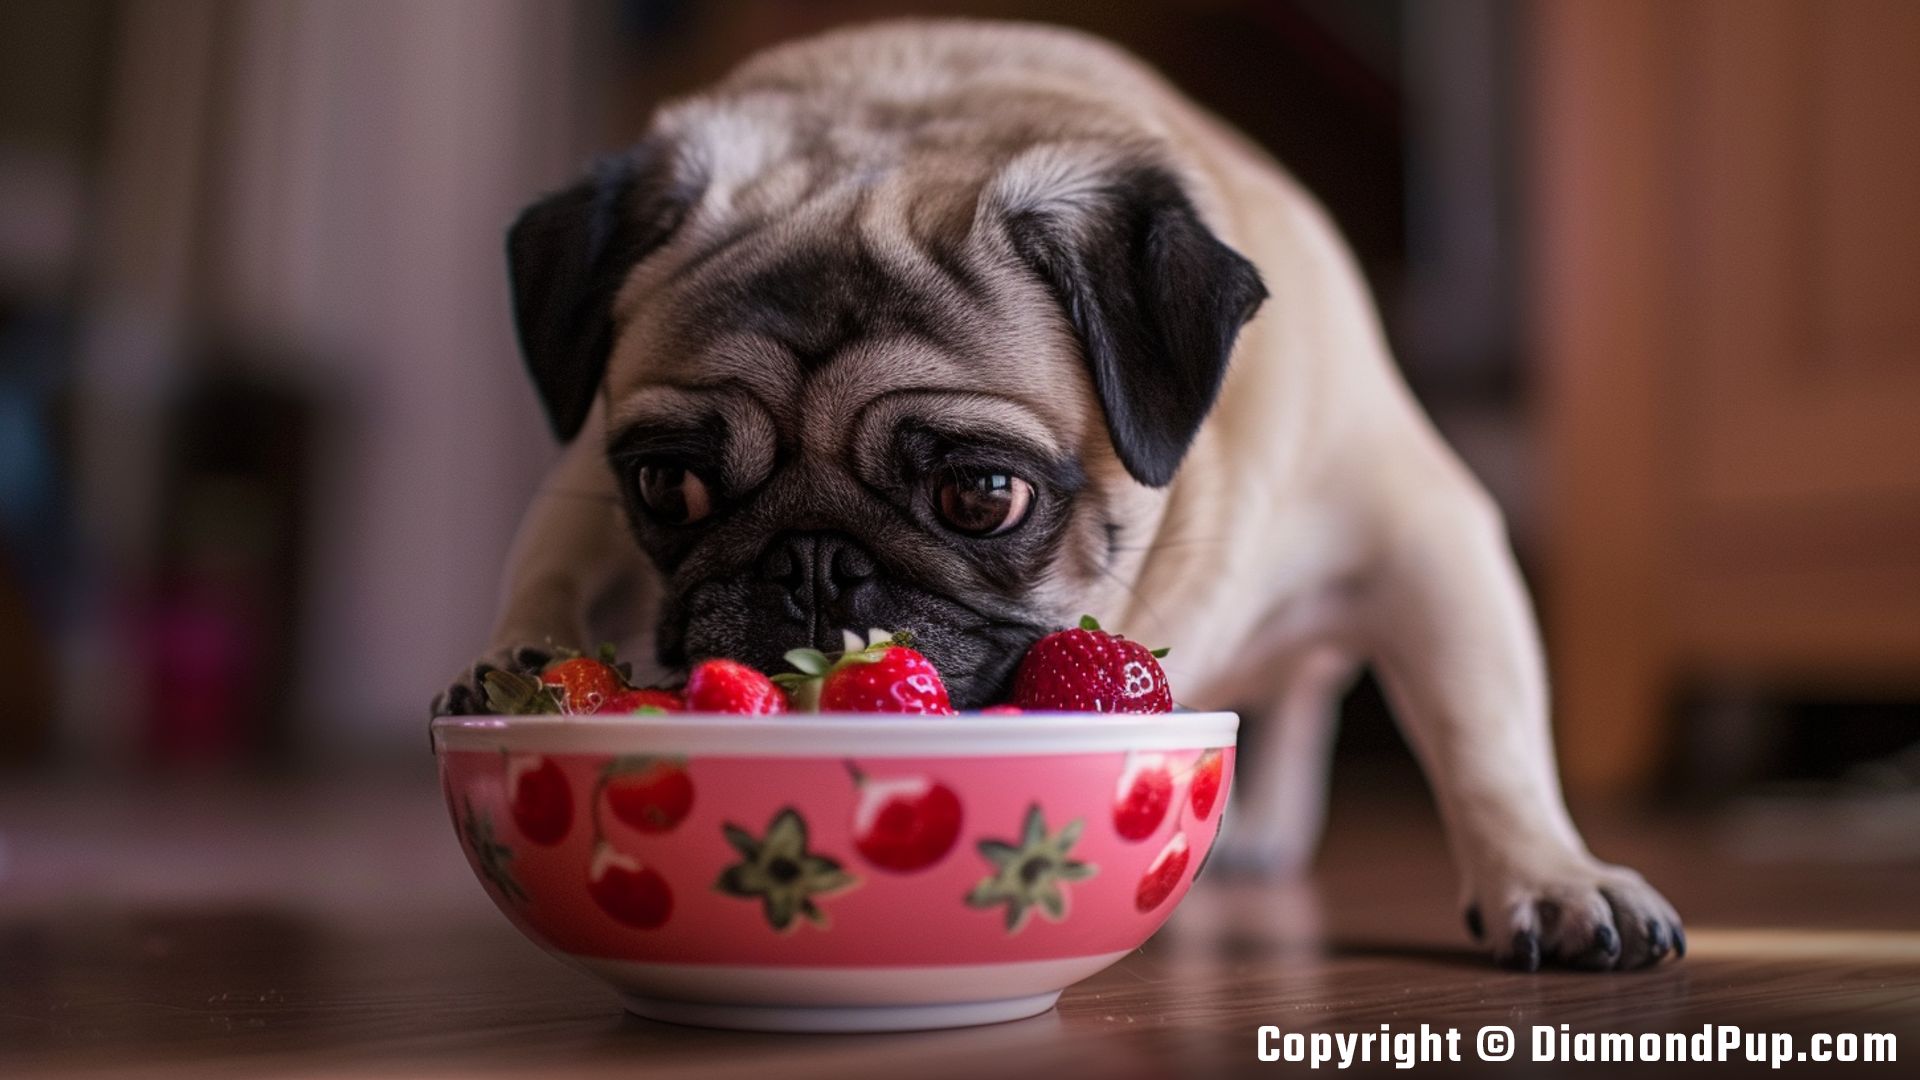 Image of a Playful Pug Snacking on Strawberries